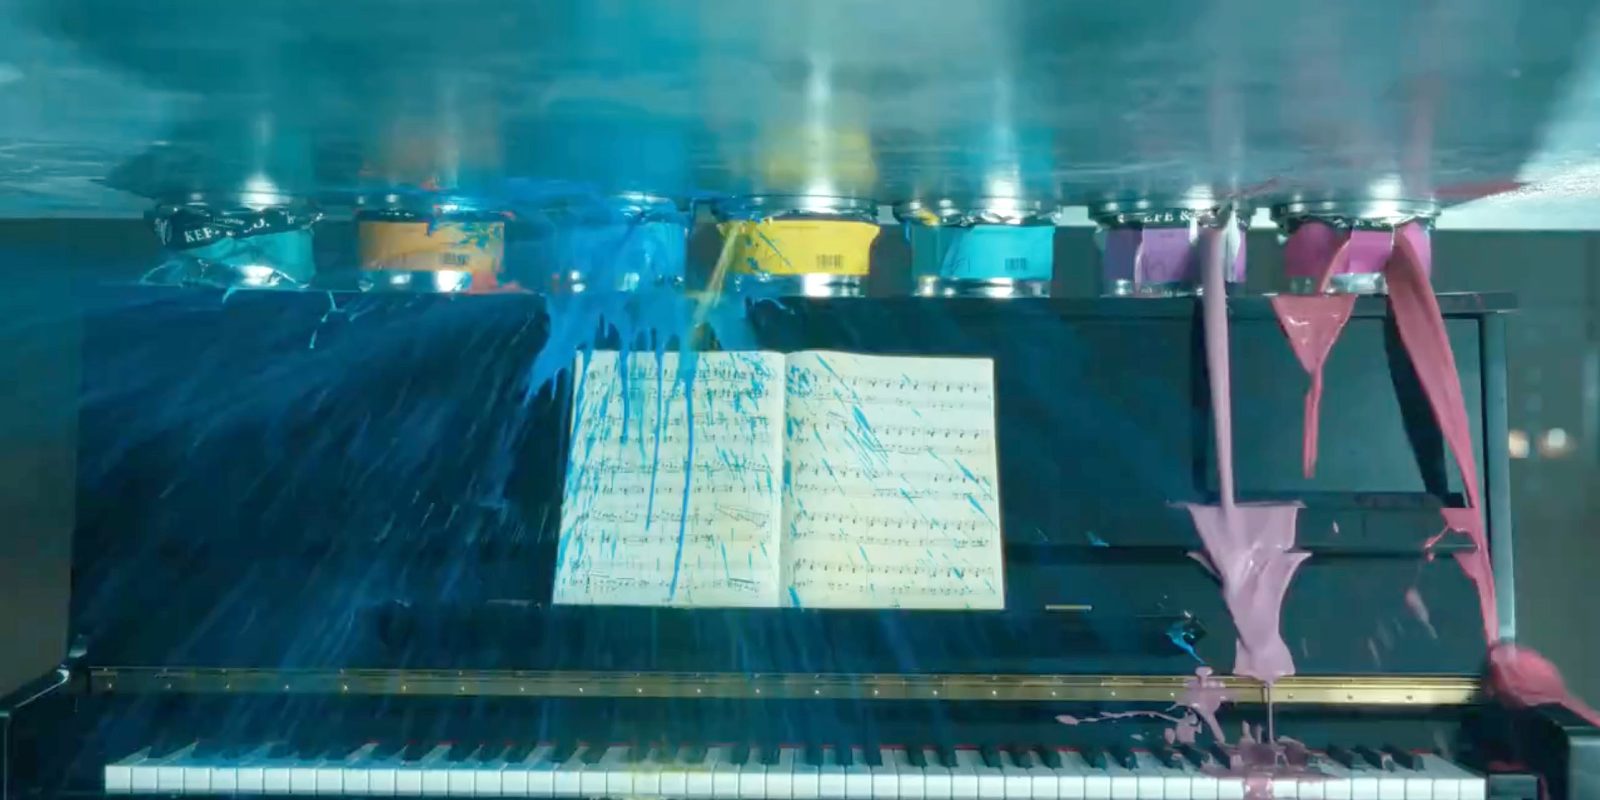 Still image from an iPad Pro ad, showing paintings being crushed and ruining a piano